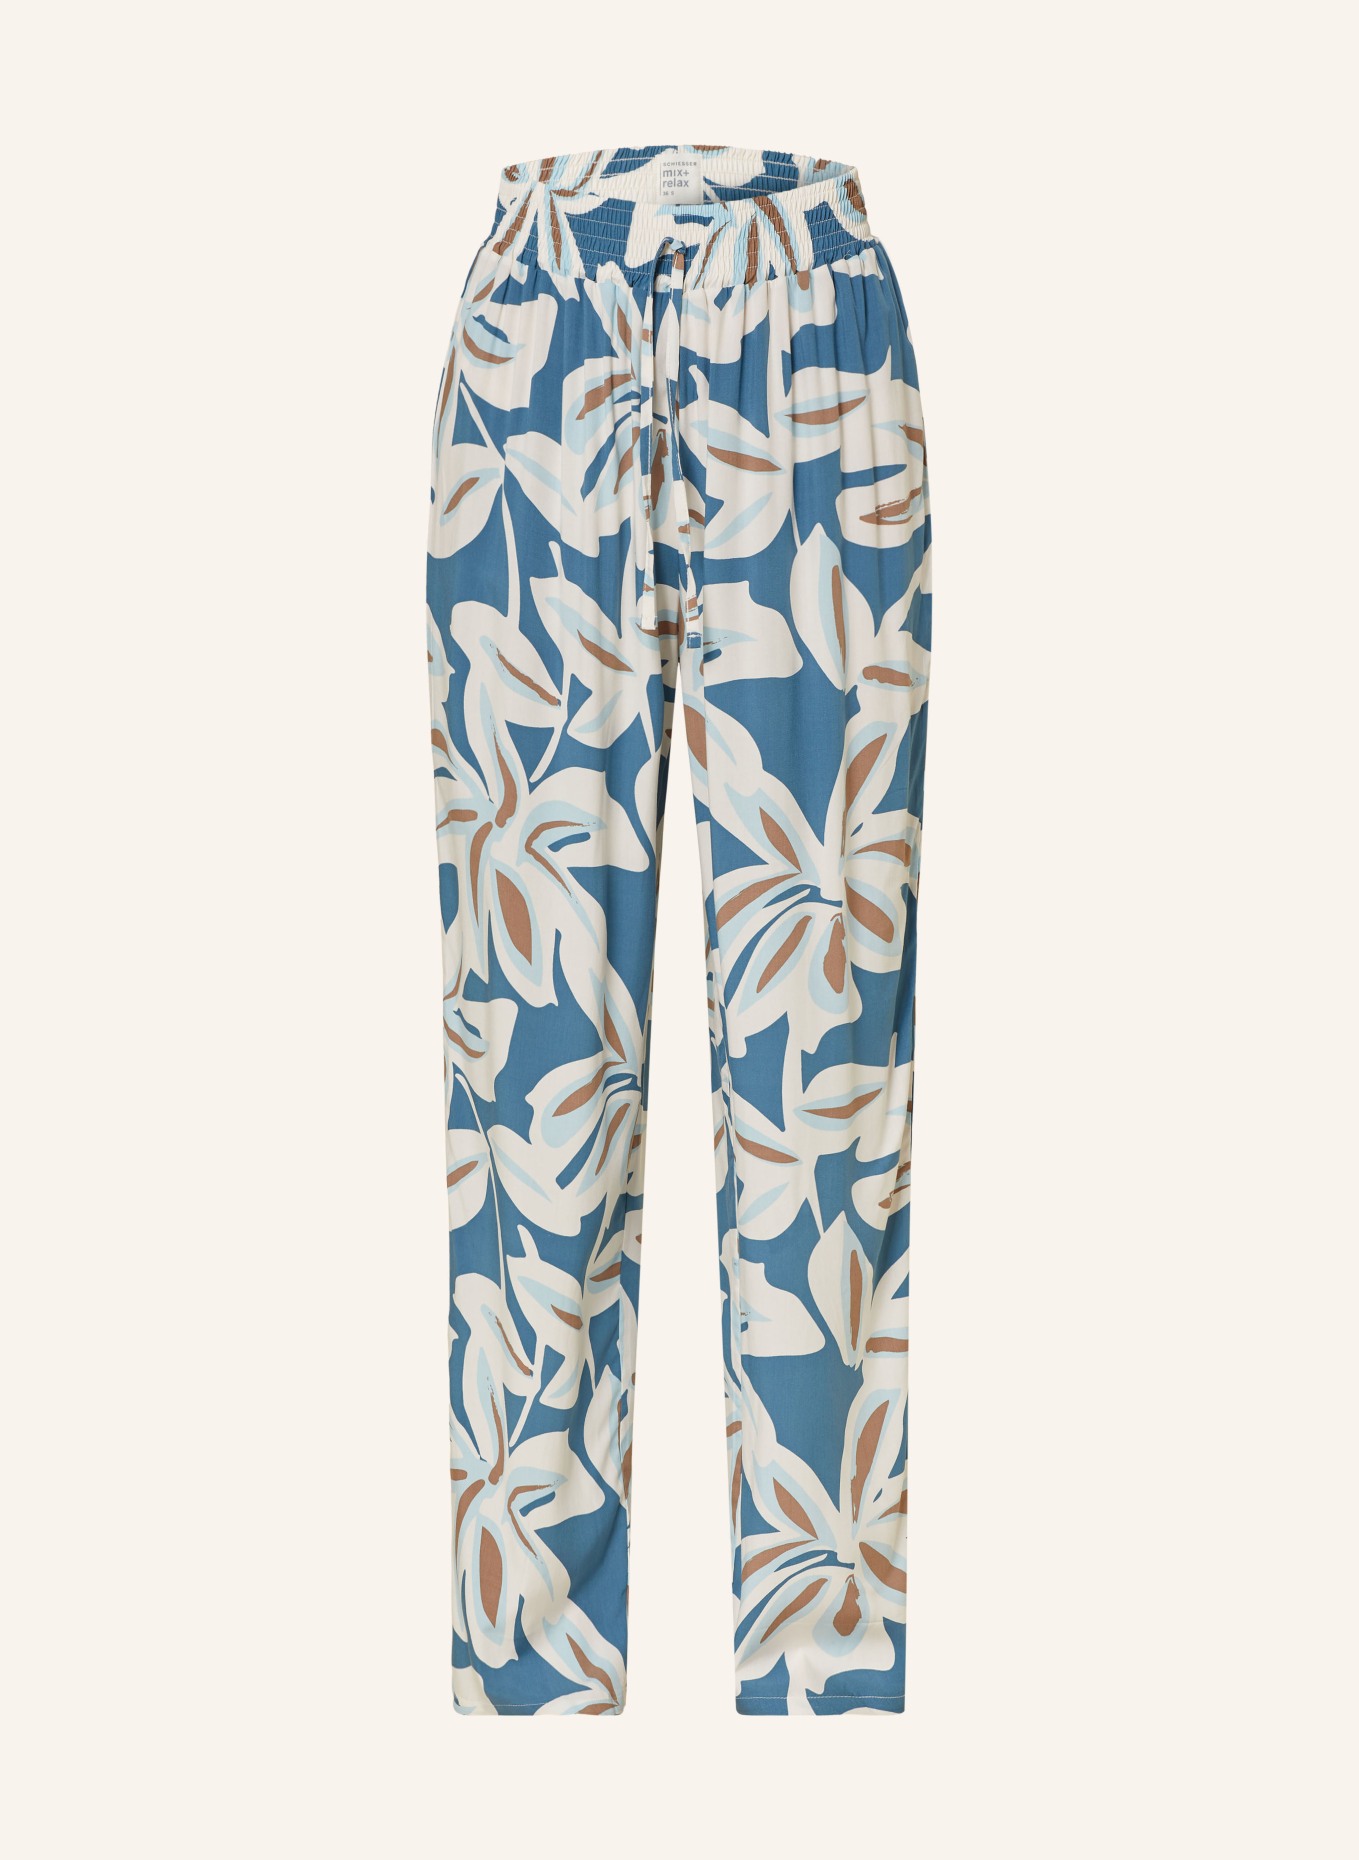 SCHIESSER Pajama pants MIX+RELAX, Color: BLUE/ WHITE (Image 1)